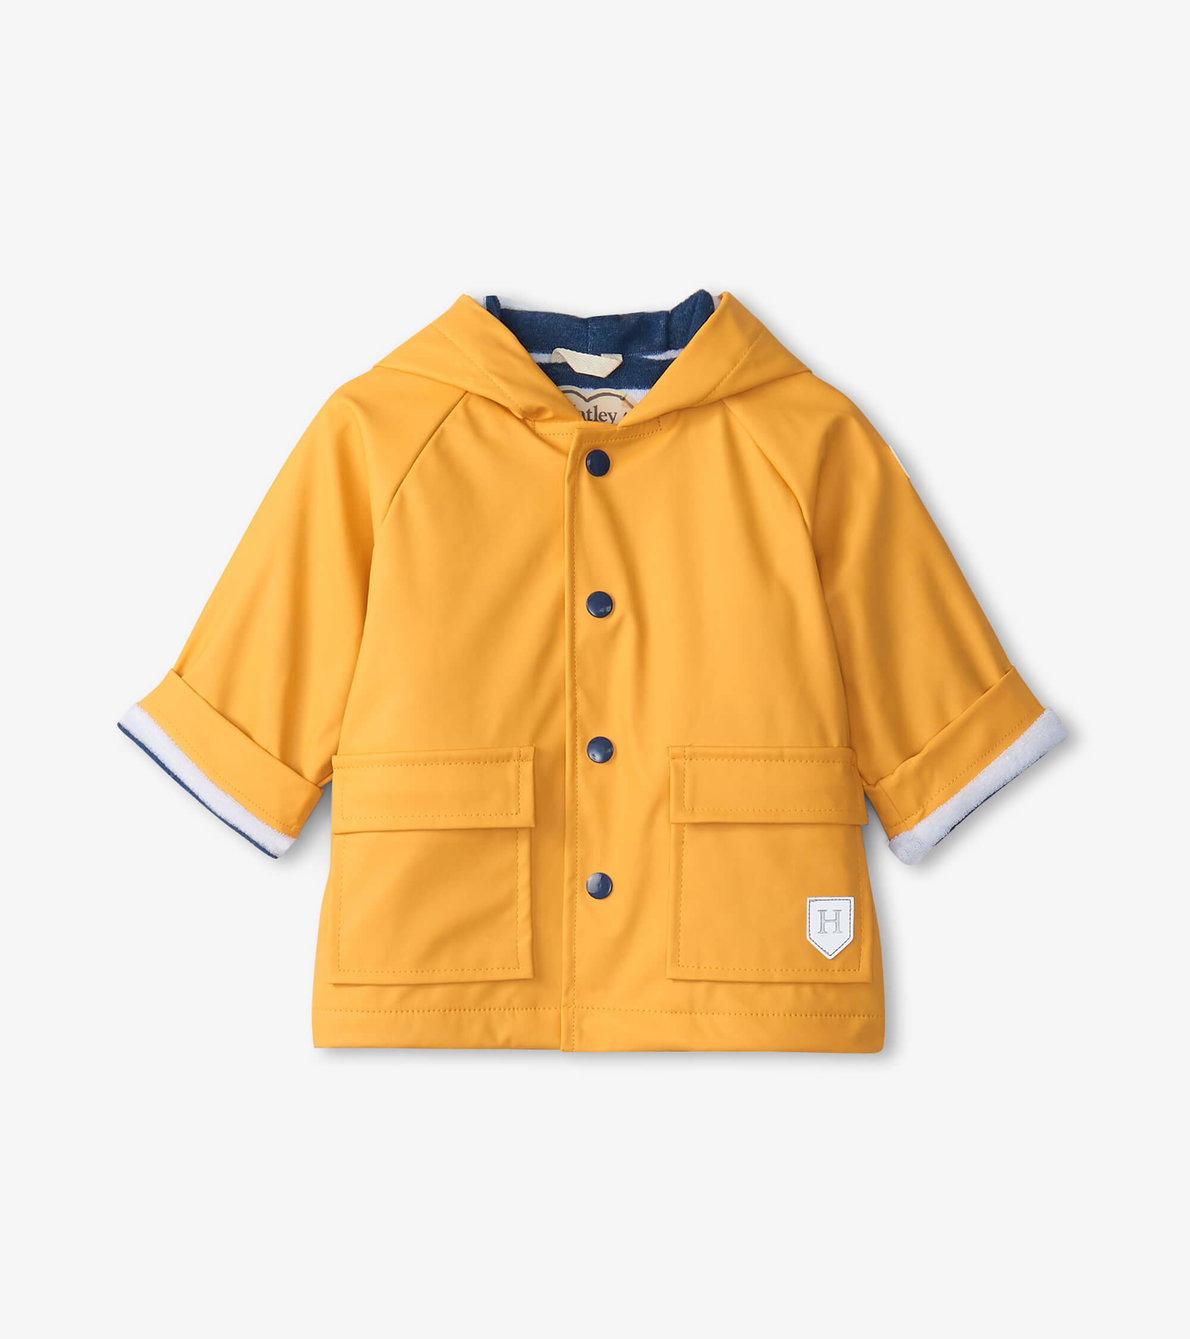 View larger image of Yellow Baby Raincoat